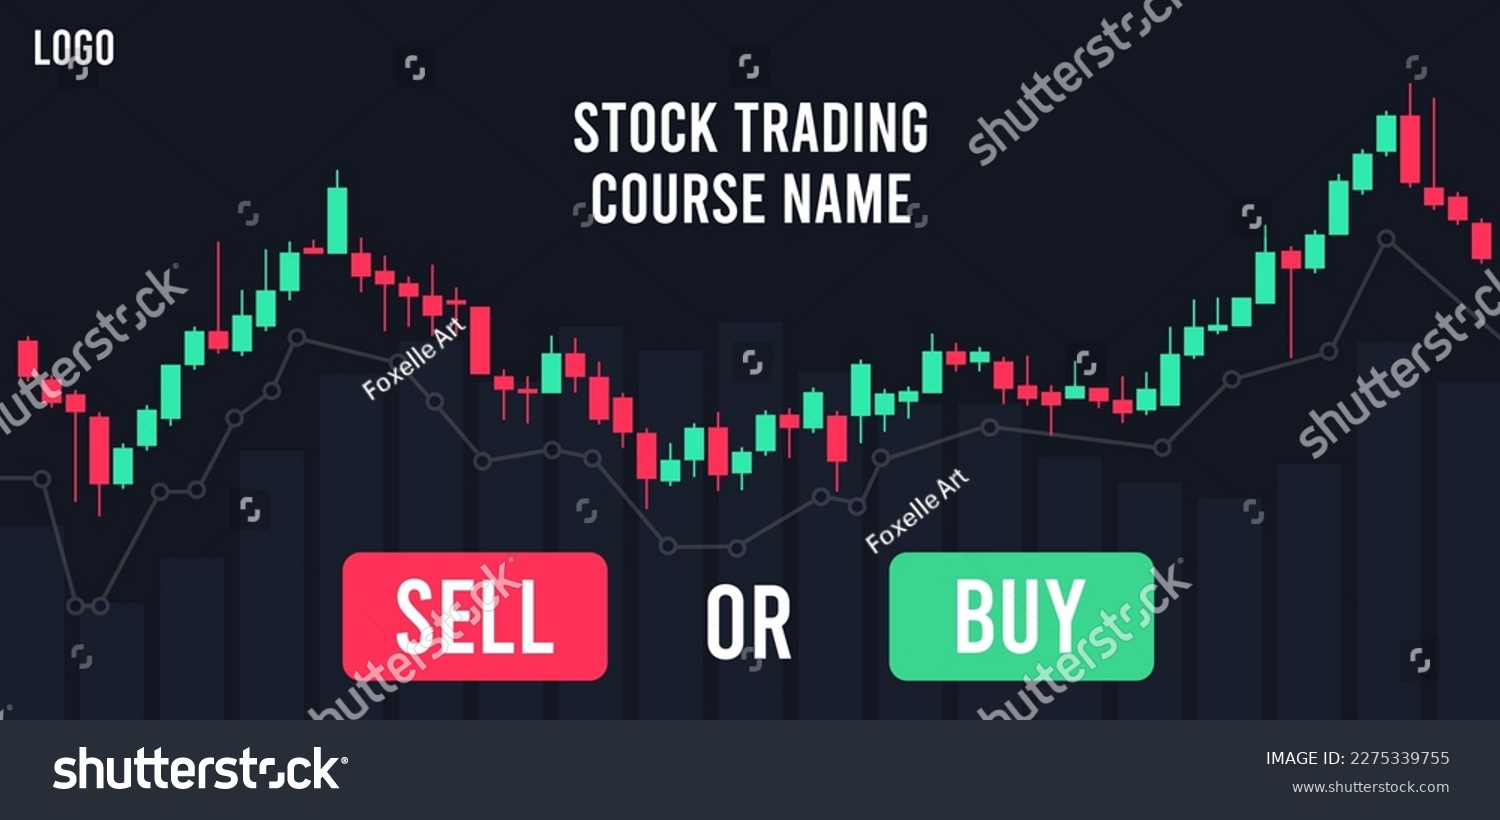 SVG of Trading courses promo page. Web banner template for trading companies and schools. Stocks market with signals to buy and sell. Vector background for advertisement svg